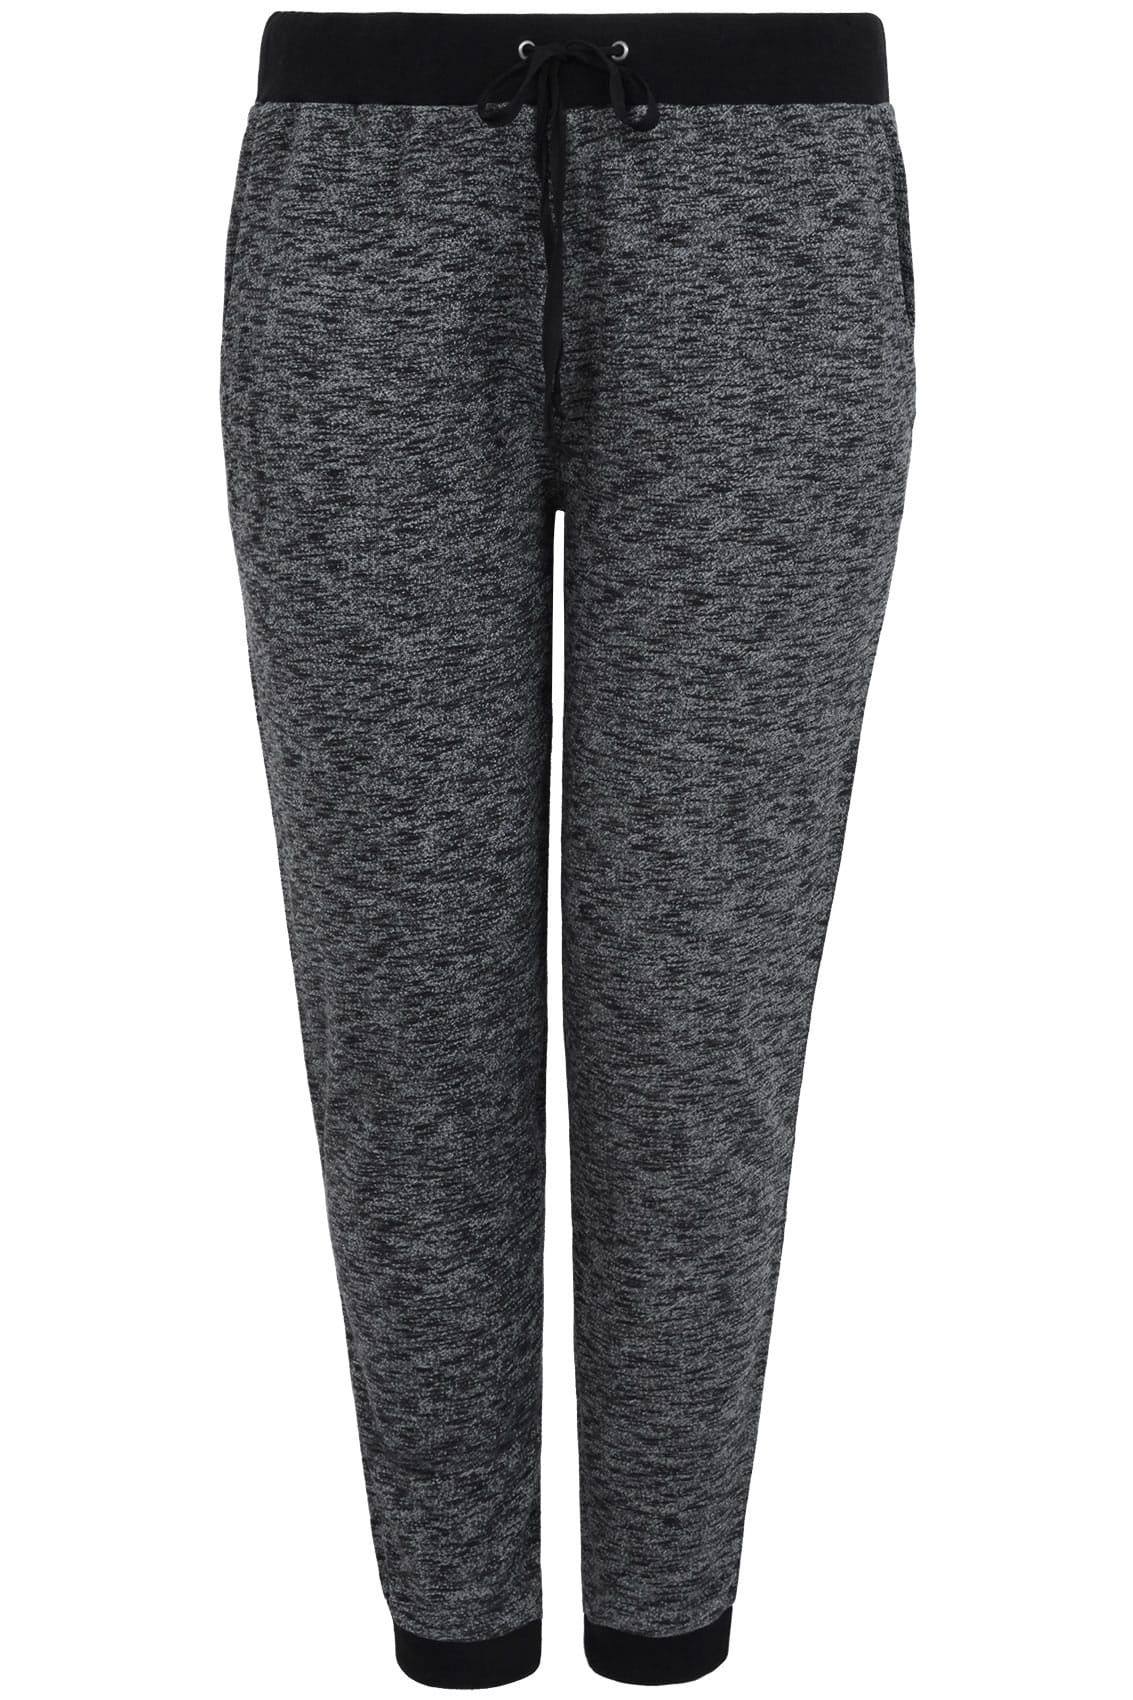 Grey Marl Joggers With Elasticated Waist & Cuff Plus Size 16 to 32